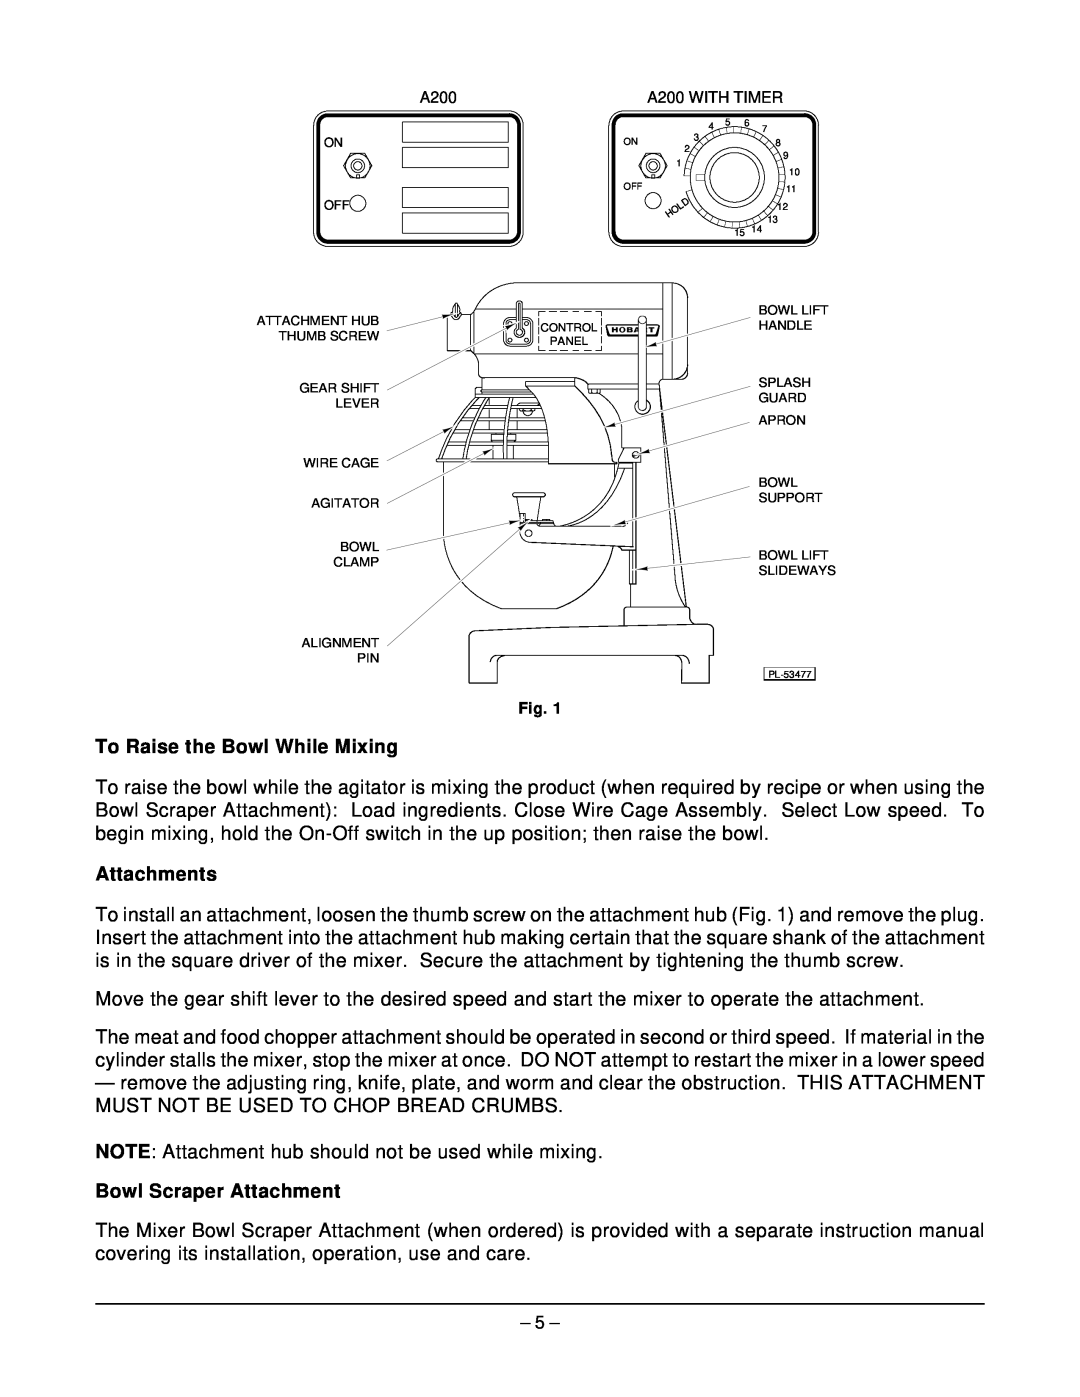 Hobart ML-104858 manual To Raise the Bowl While Mixing, Attachments, Bowl Scraper Attachment 